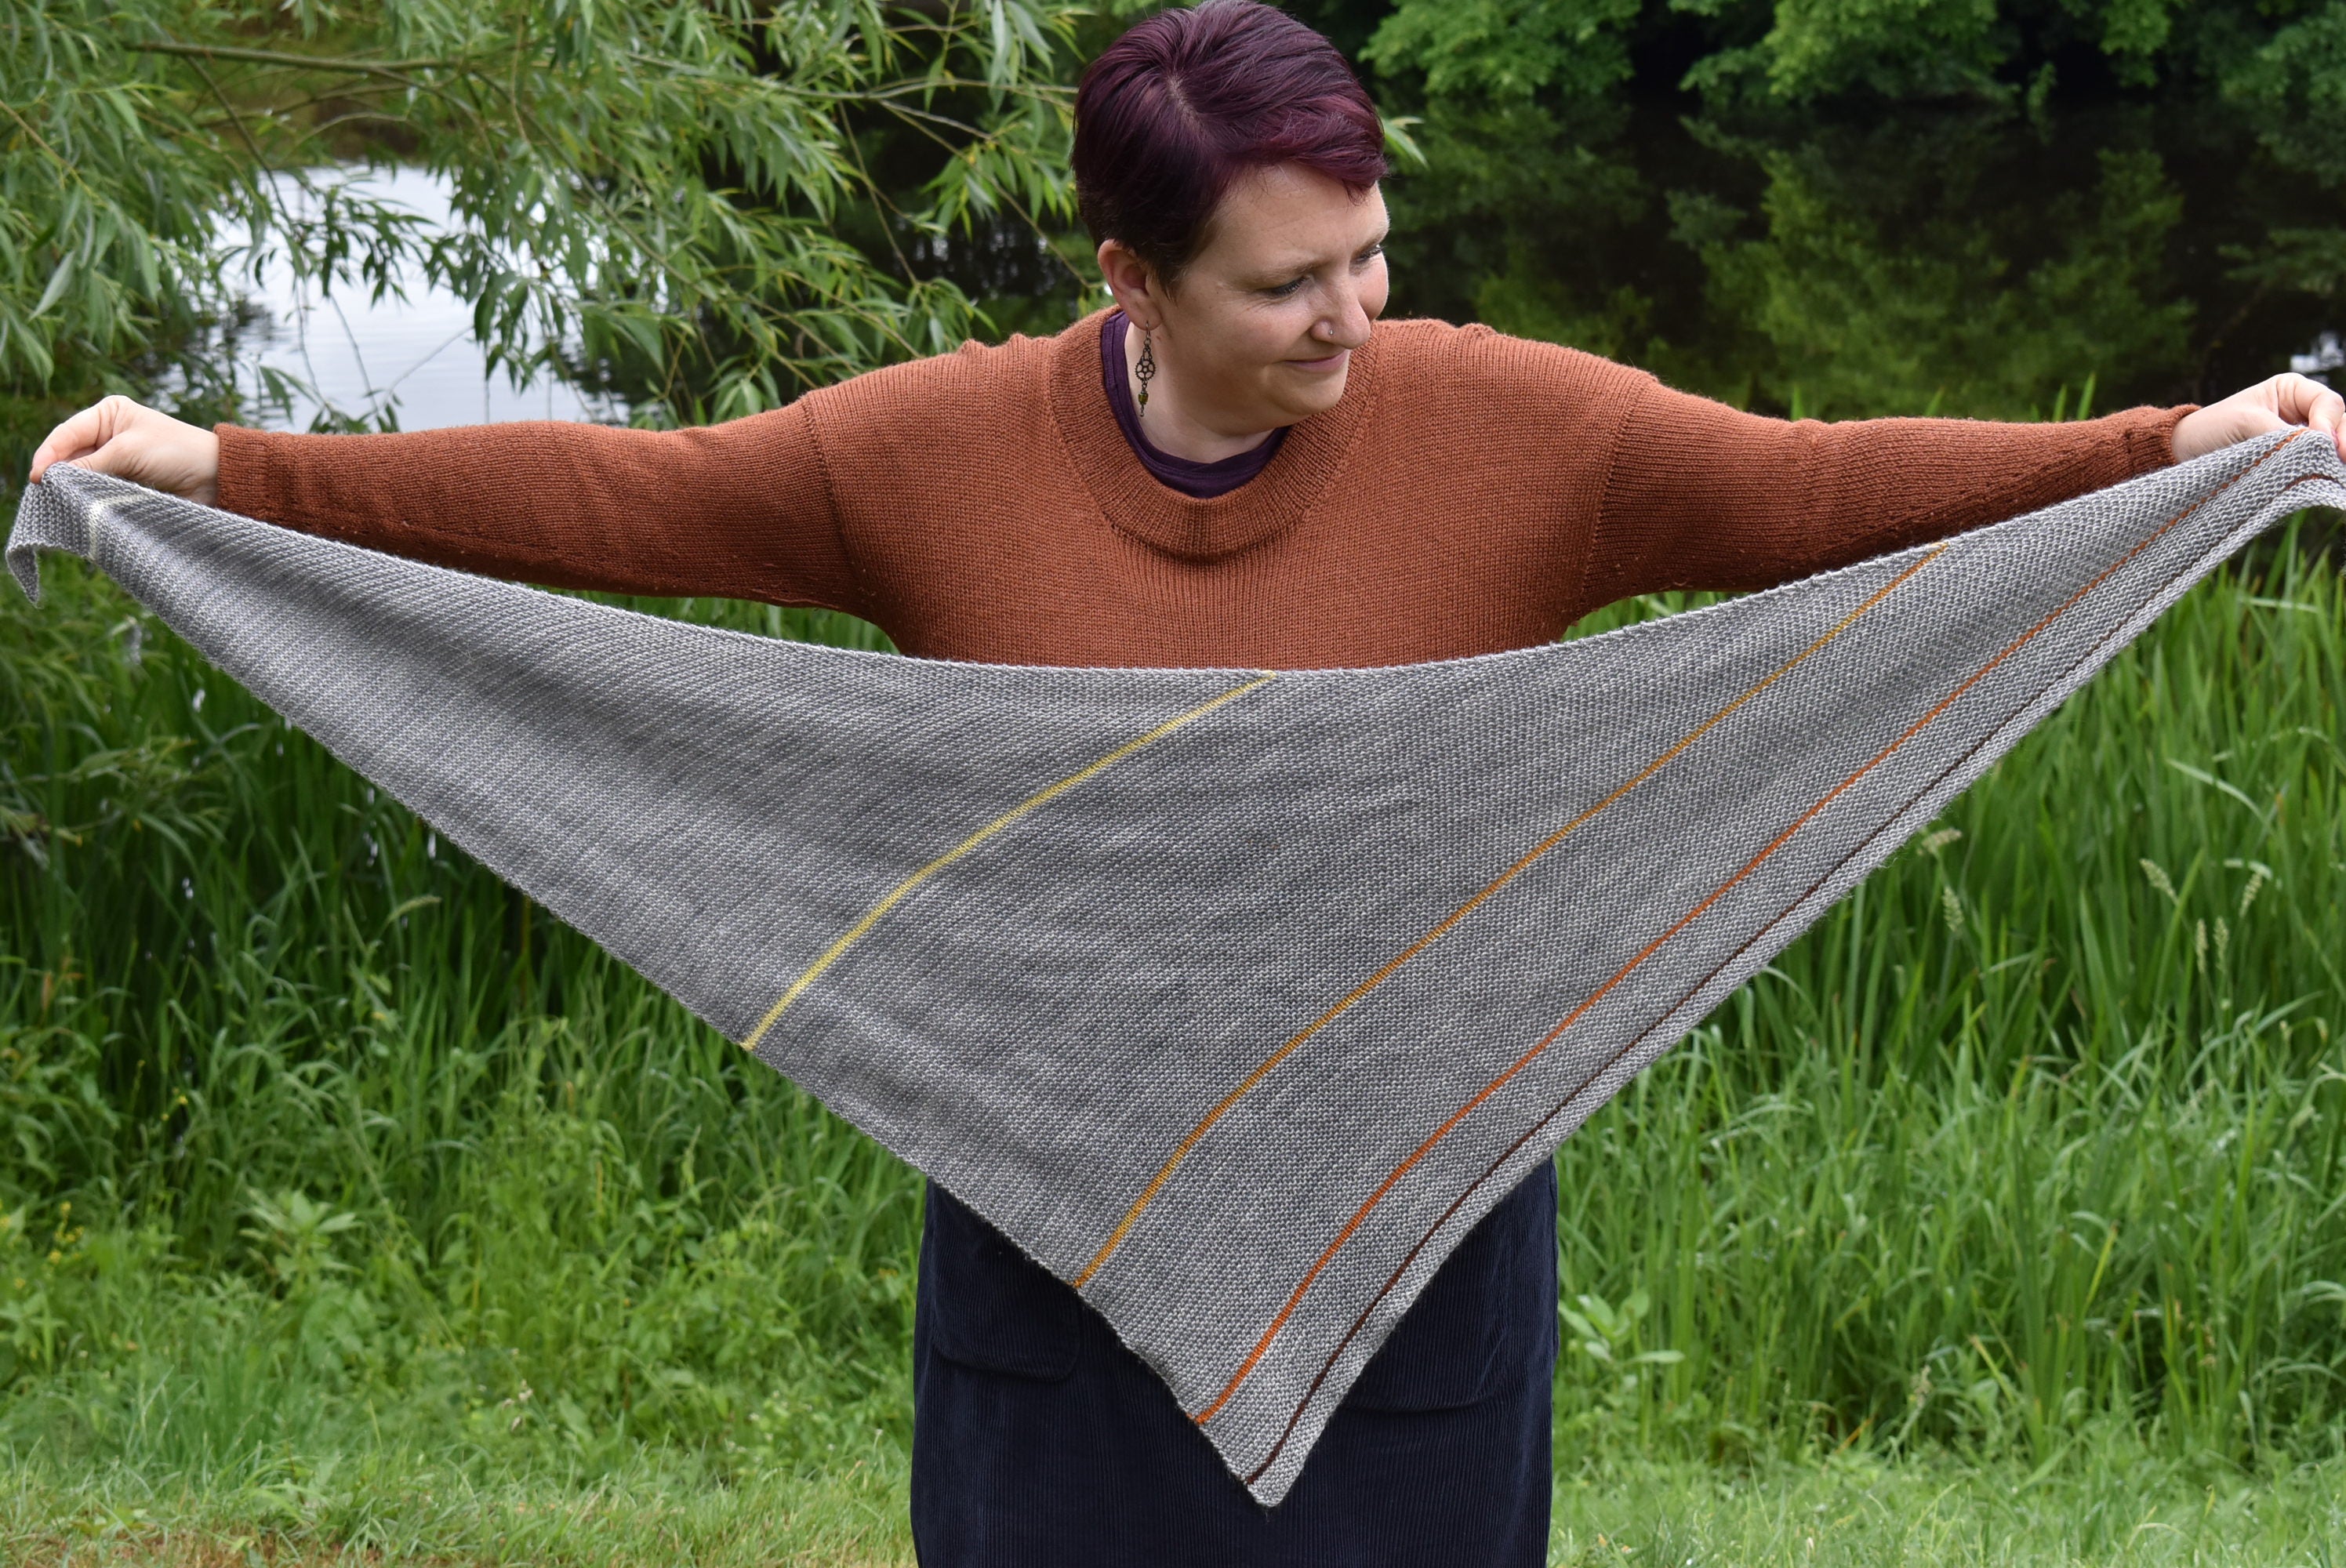 Victoria holding a grey triangular shawl outstretched. The shawl features small stripes in shades of yellow, orange and brown.